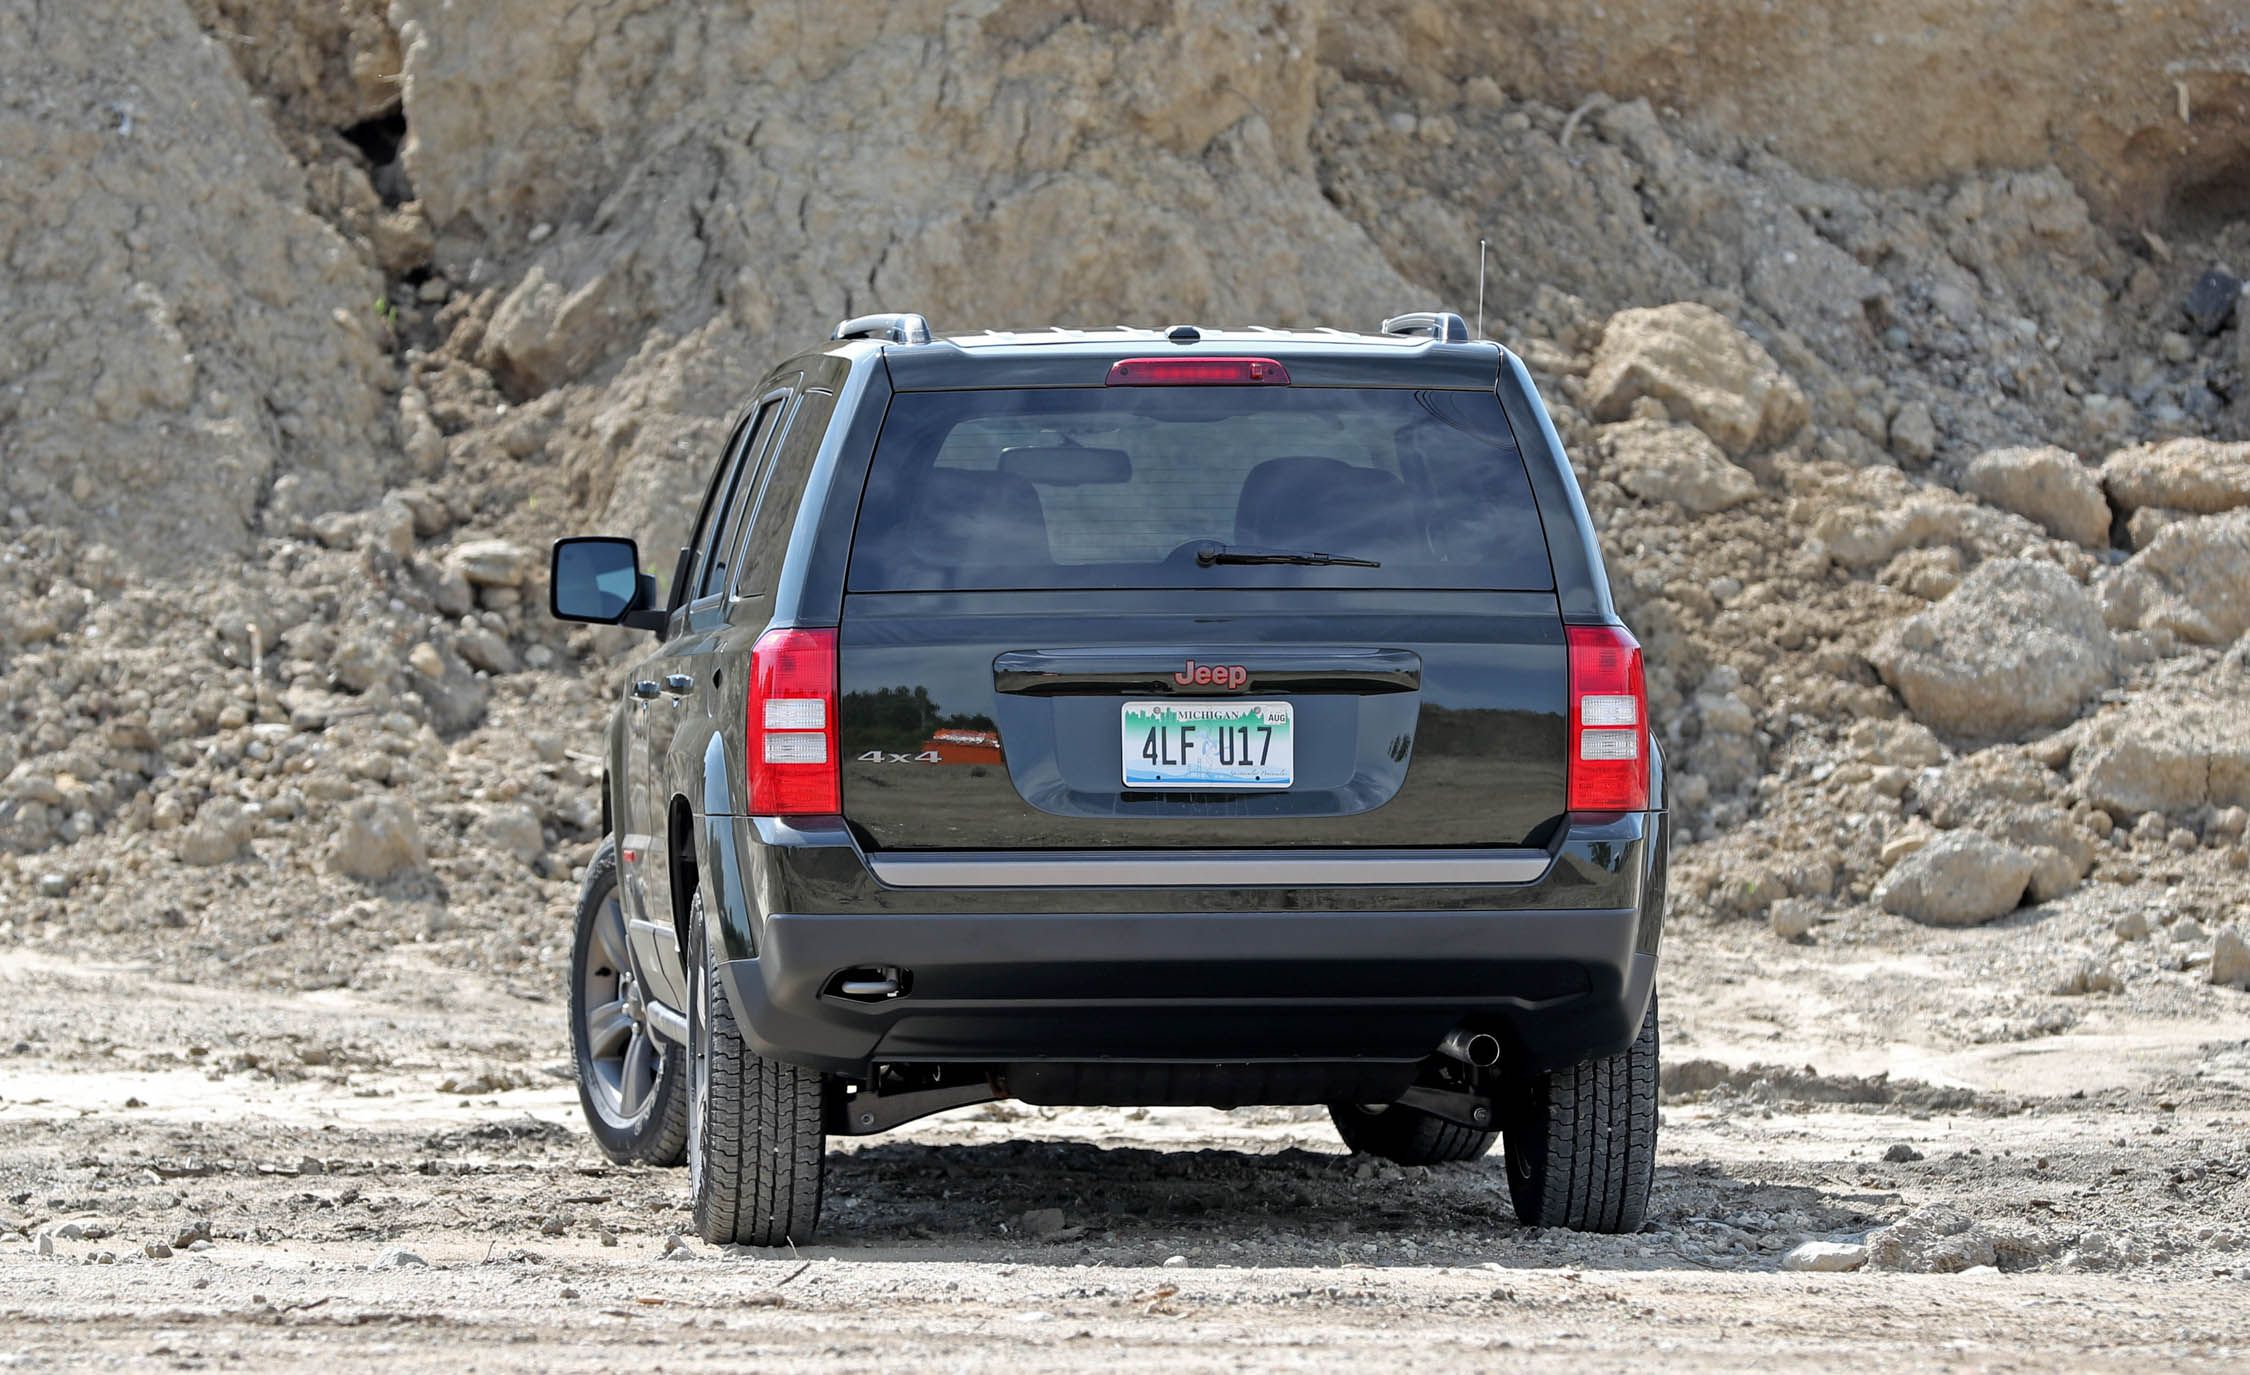 2016 Jeep Patriot Exterior Rear End (View 23 of 27)